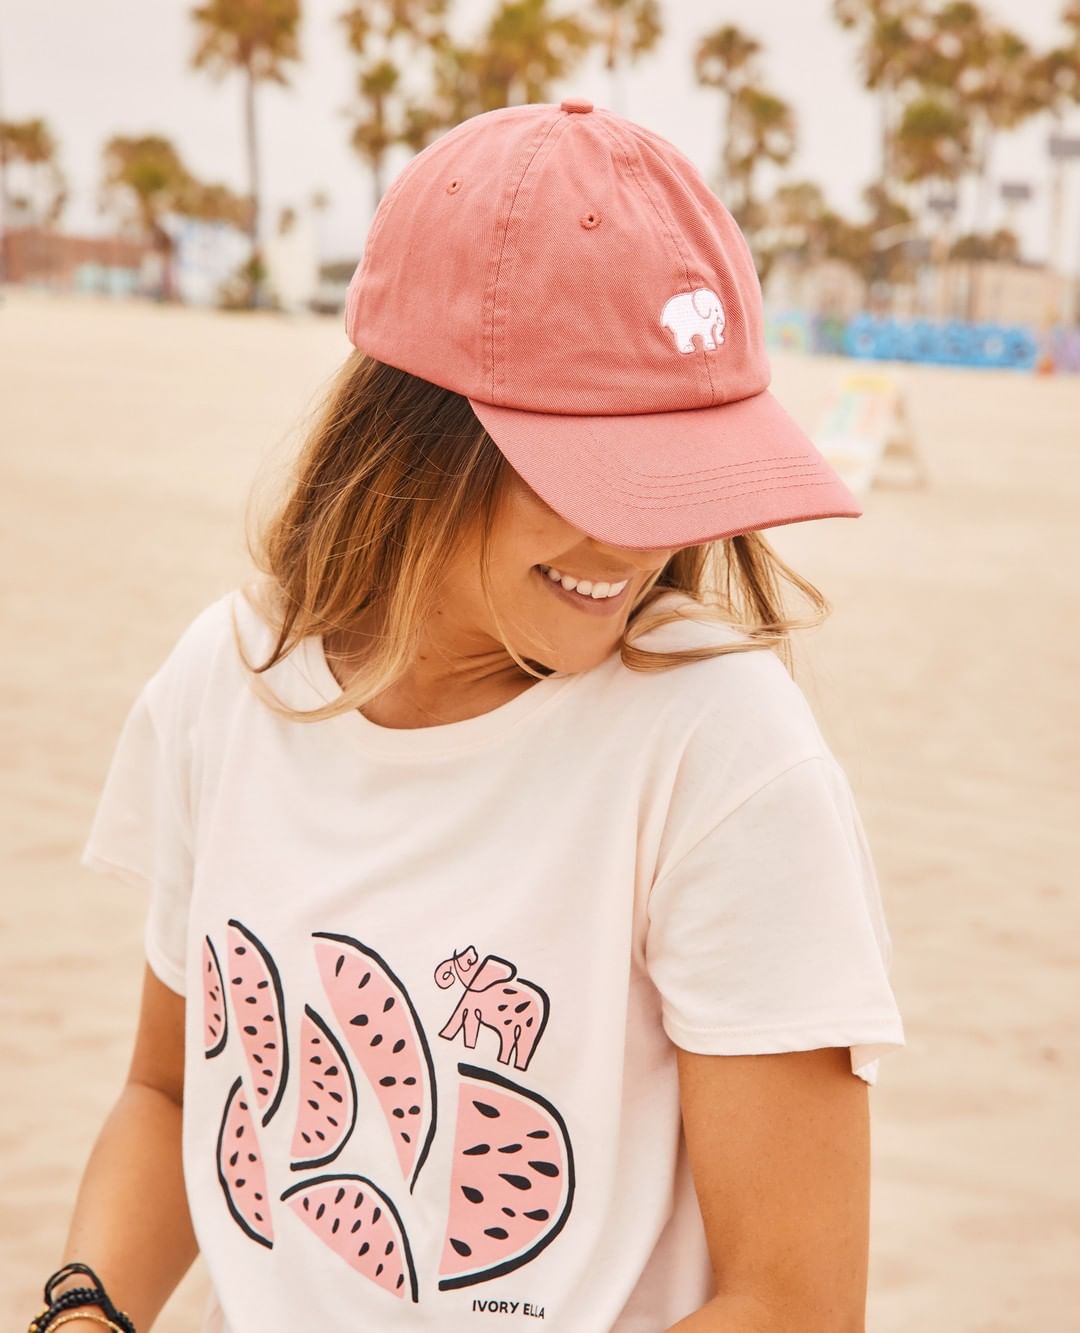 Ivory Ella - ⁠Rep the herd with pride with an IE Baseball Cap in Mauvewood 🐘 🌸⁠
⁠
Today is the last day to receive this fan favorite FREE with any purchase on our site over $70. Tap above to start sho...